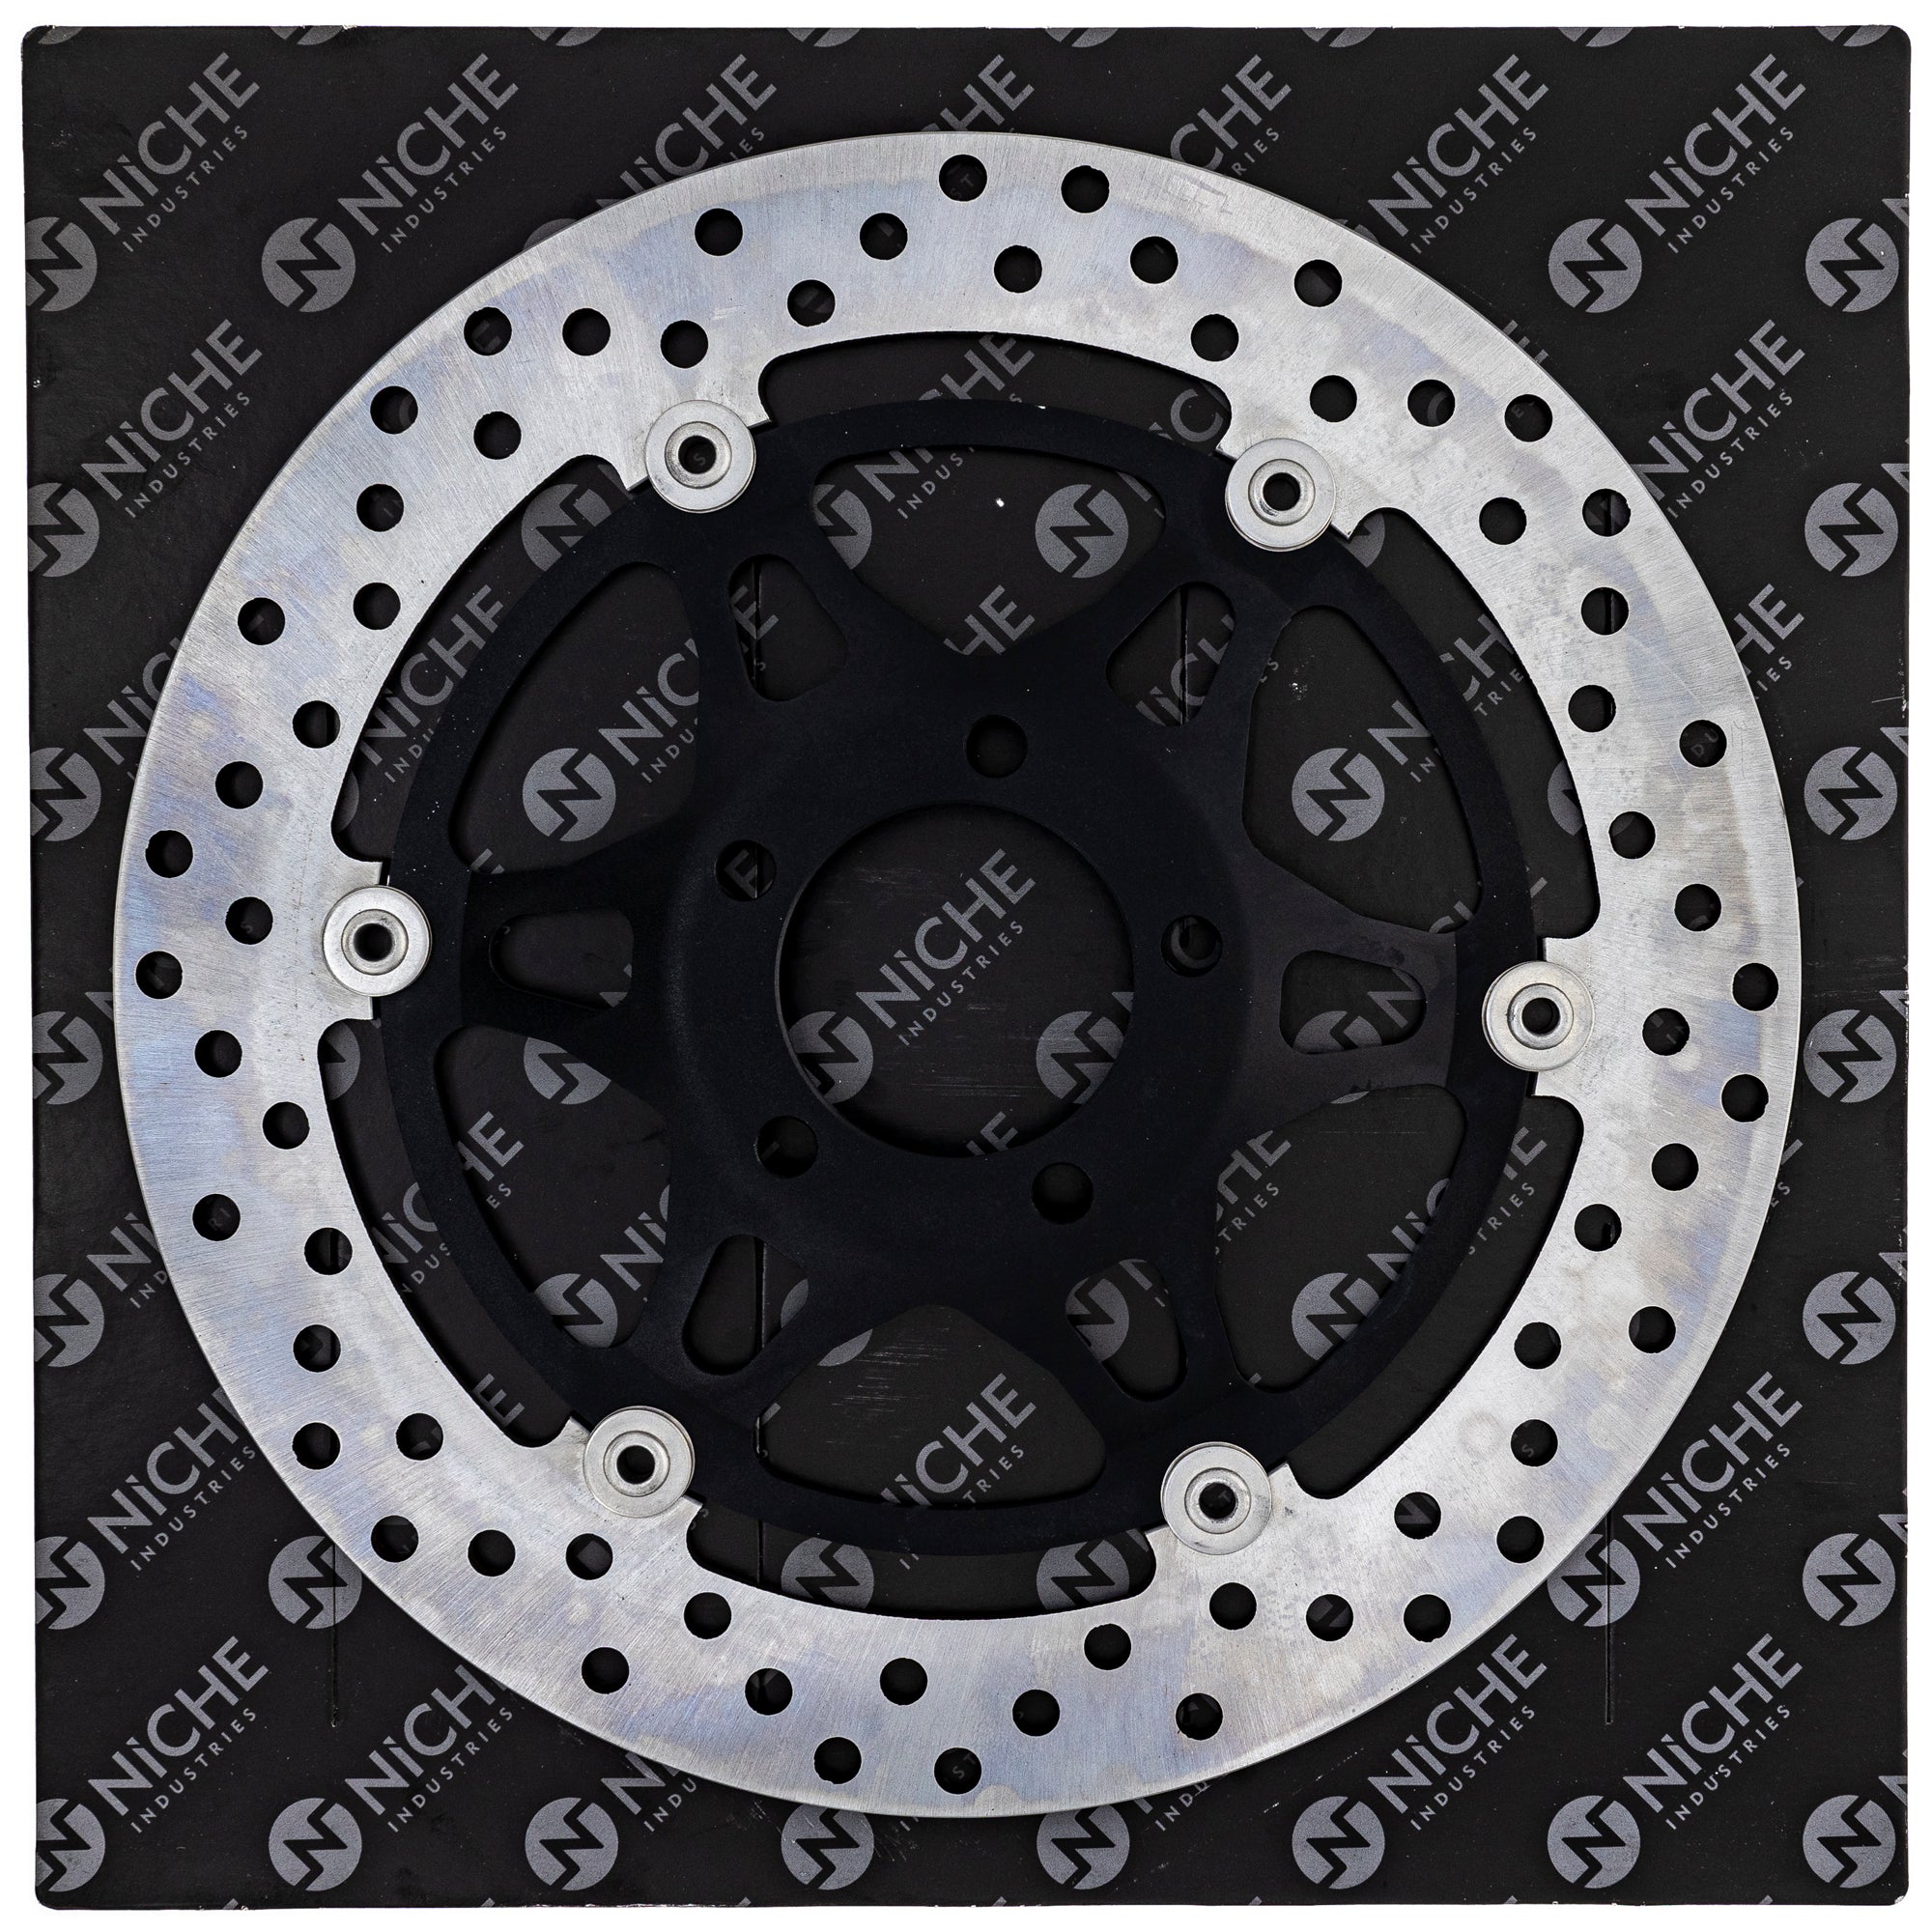 NICHE 519-CRT2413R Front Brake Rotor for zOTHER RF900R GS500F GS500E